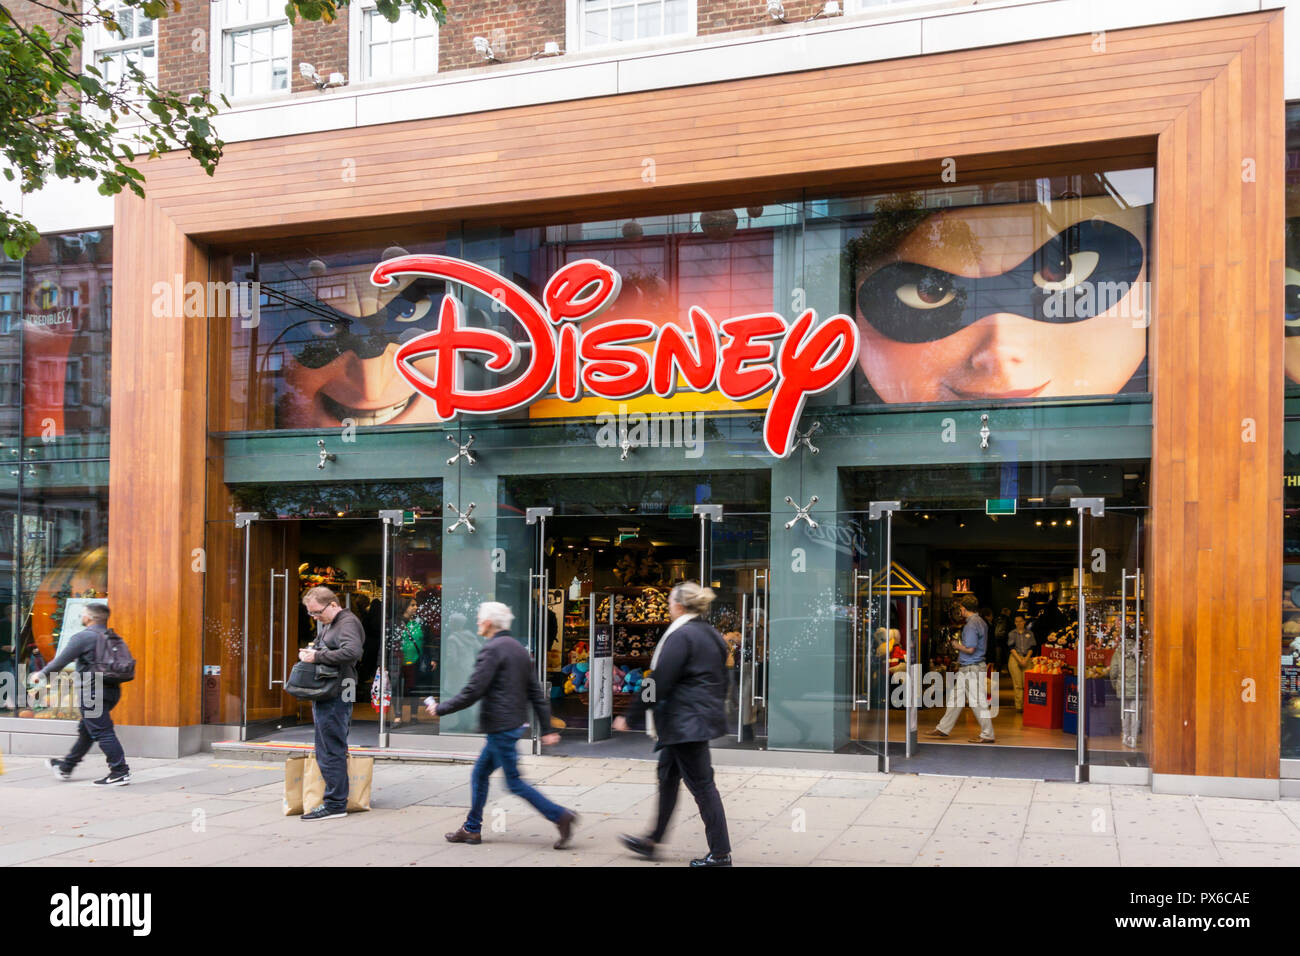 Disney Store only sells Disney related items.  Shown is shop in Oxford Street, London. Stock Photo